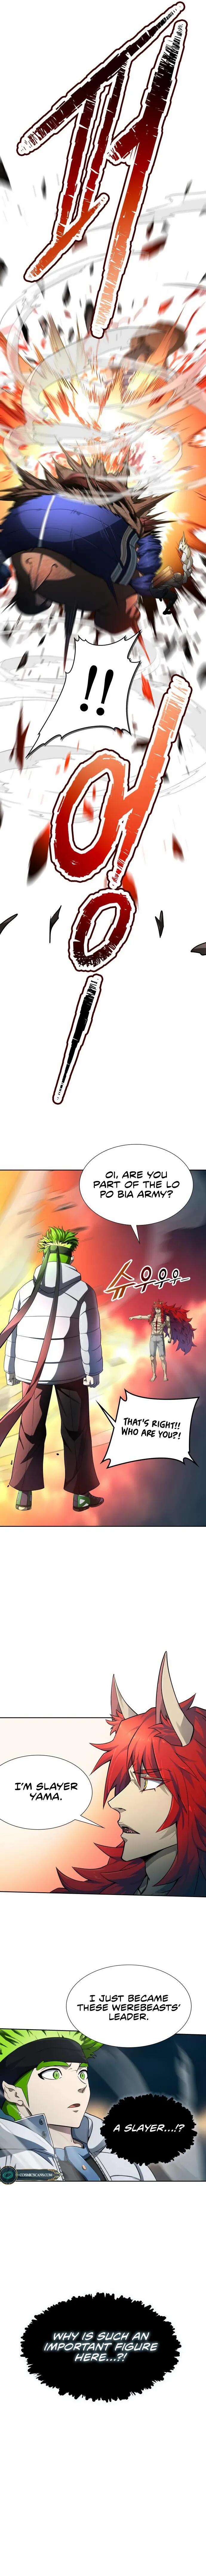 Tower Of God Chapter 579 Read Tower Of God Chapter 579 - Manganelo